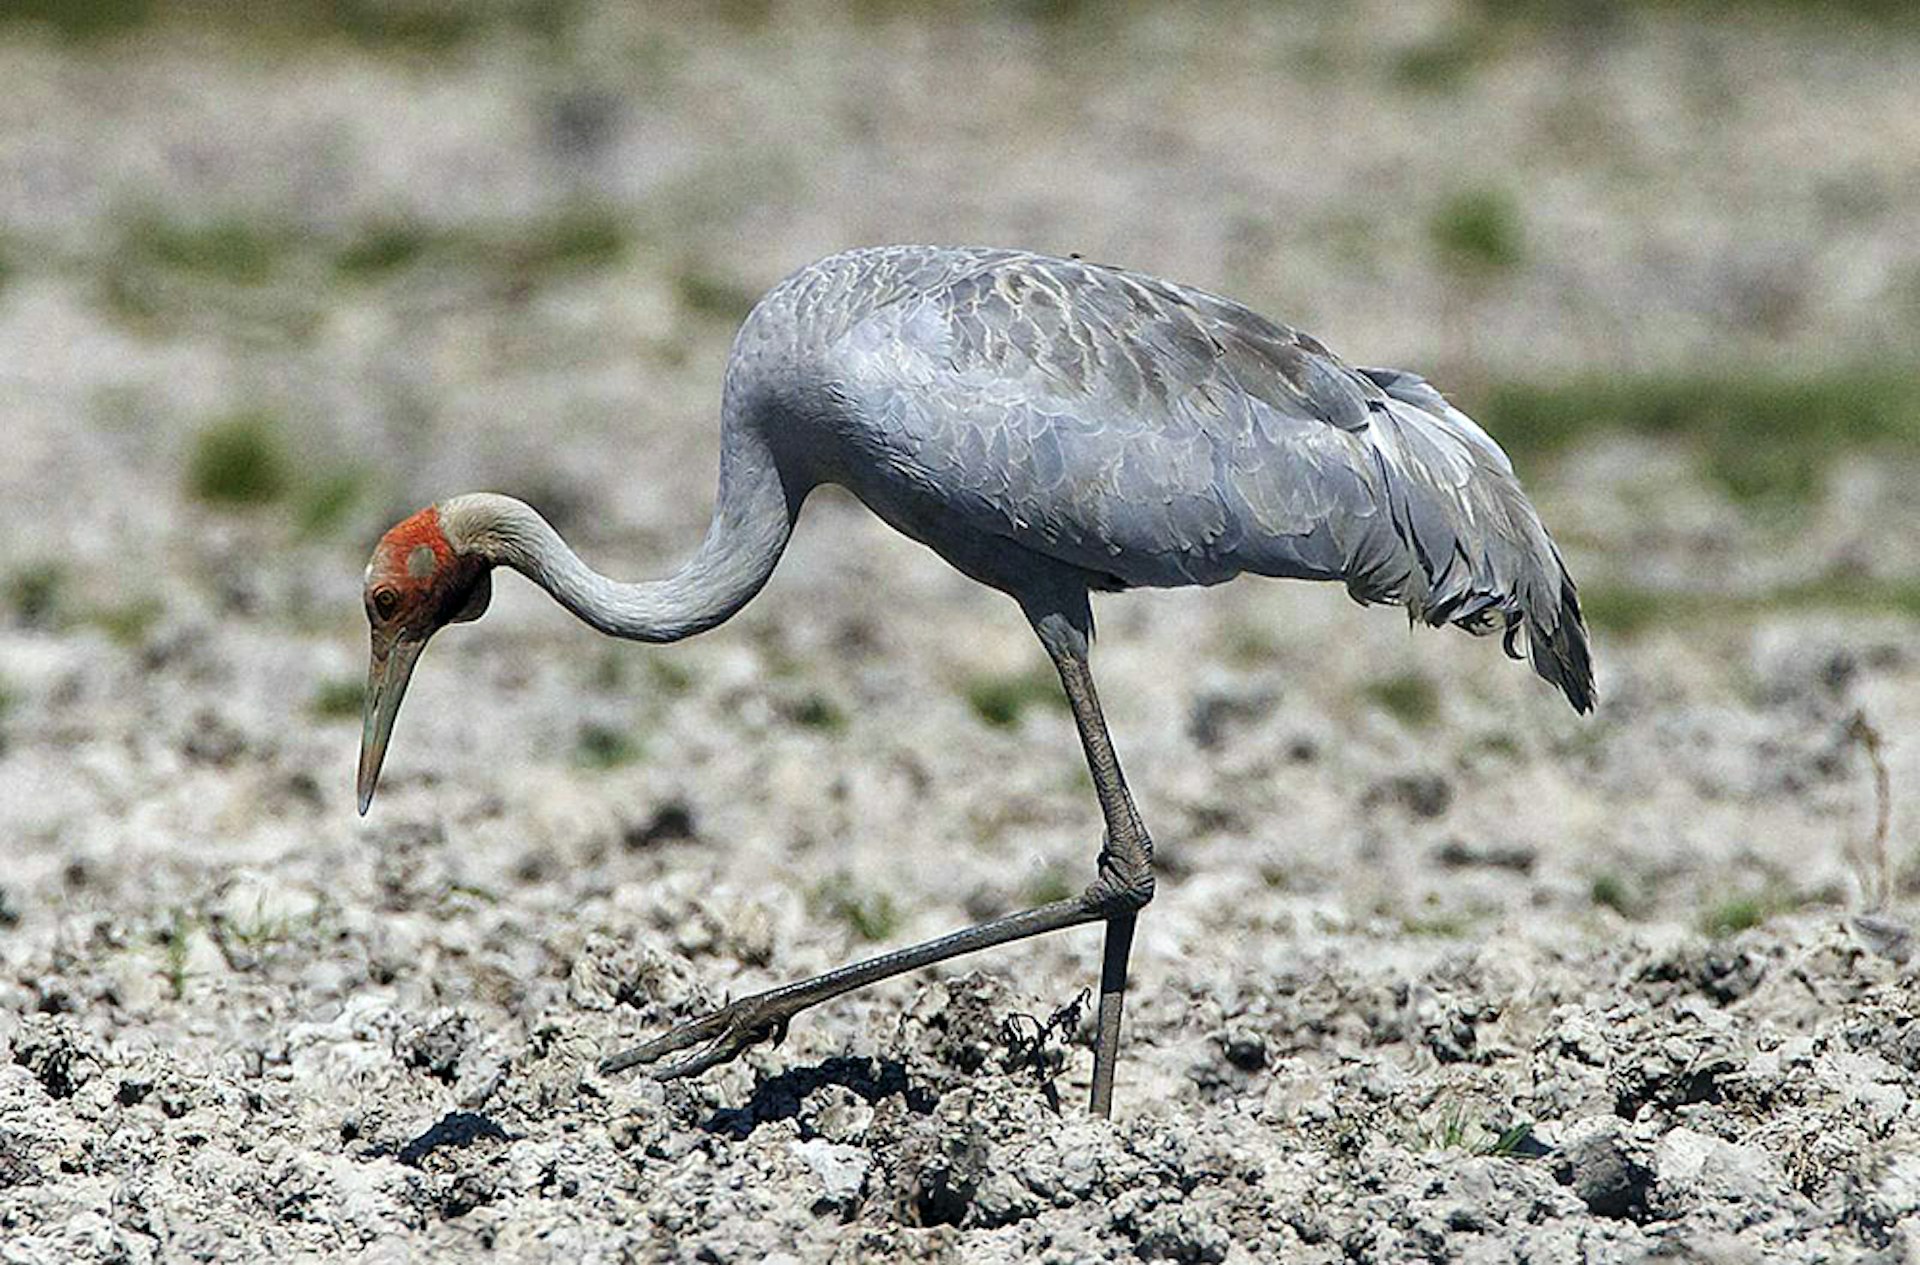 Wetlands around the Kimberley are a great bet for spotting the balletic brolga. Brolga. Image by Lip Kee / CC BY-SA 2.0